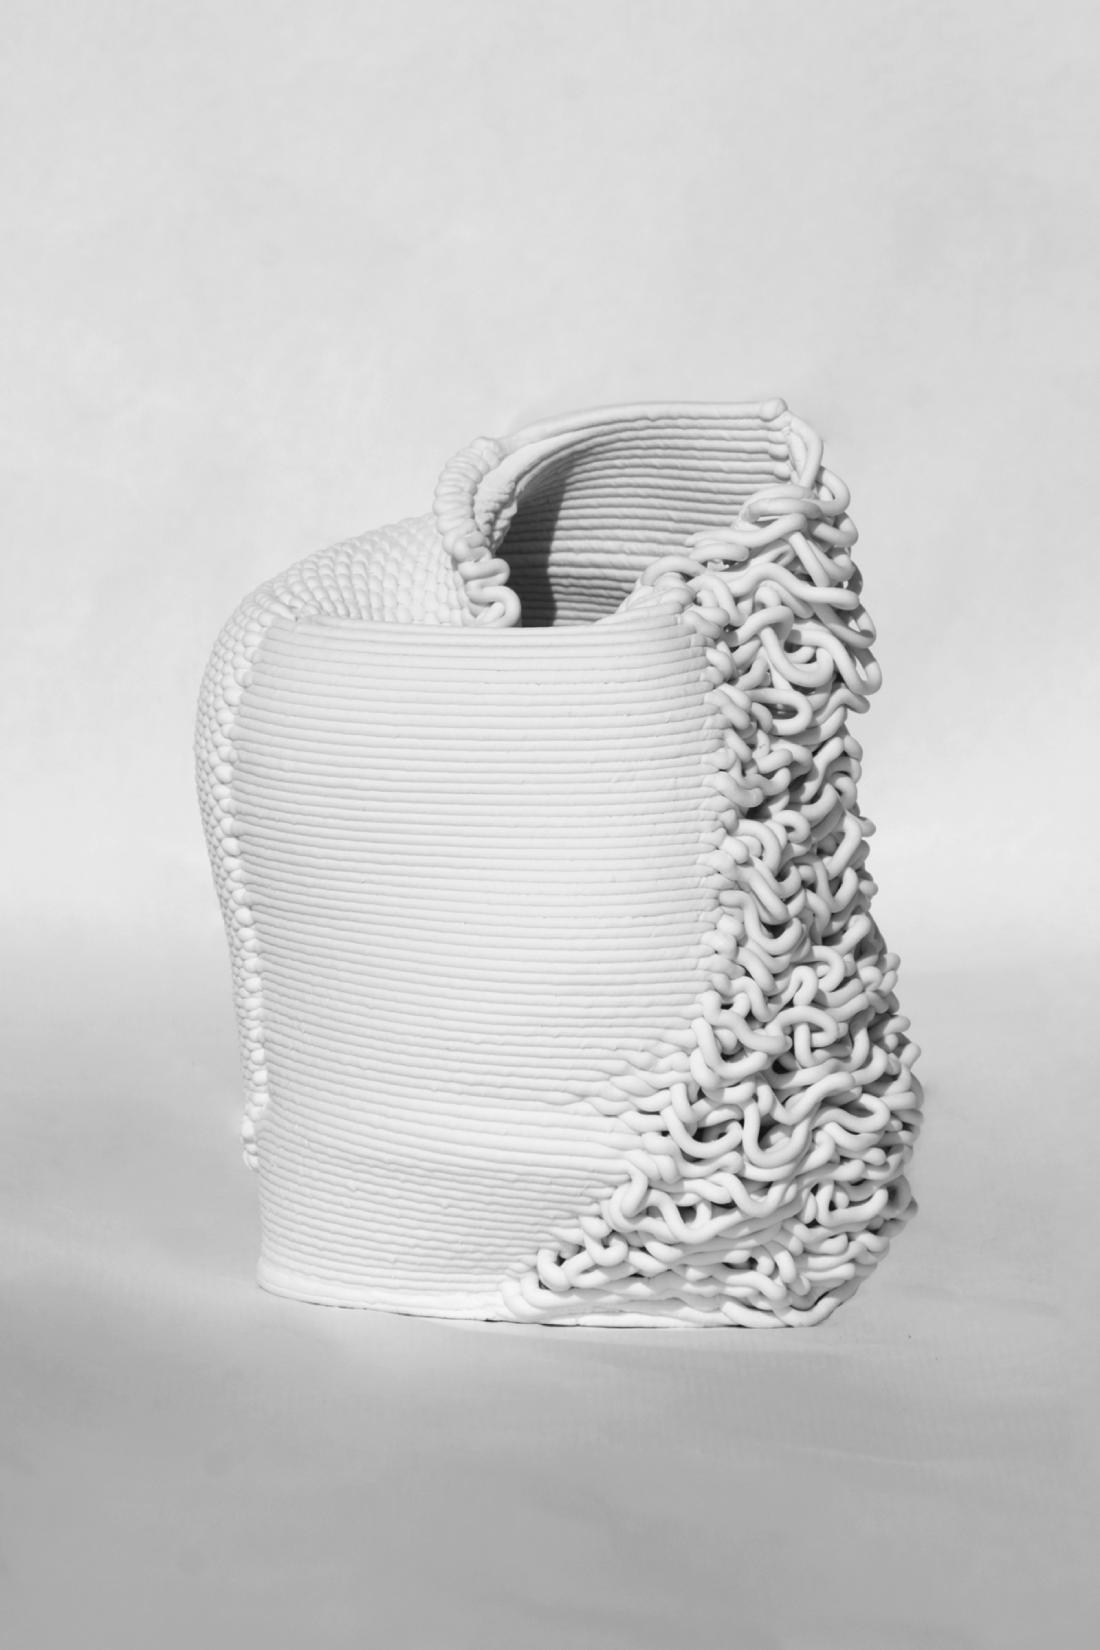 Third piece, made of printed porcelain. It has a cup-like shape, but the left upper wall is collapsed inwards. The printed layers are very loose on the right side, resembling threads. The left side has a knitted-like texture. In between these sides, it has the default 3D-print layer texture.